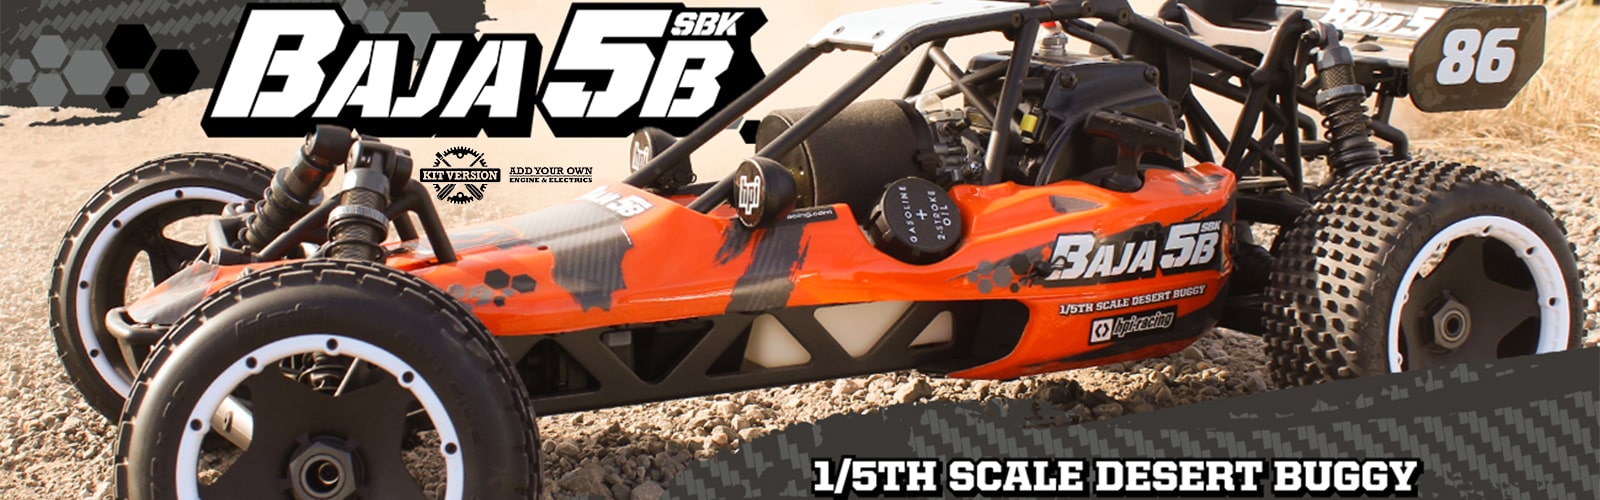 Hobby Sportz – Best Hobby Shop in UAE | Biggest selection of RC Cars | RC  car dealers |Free Delivery Available